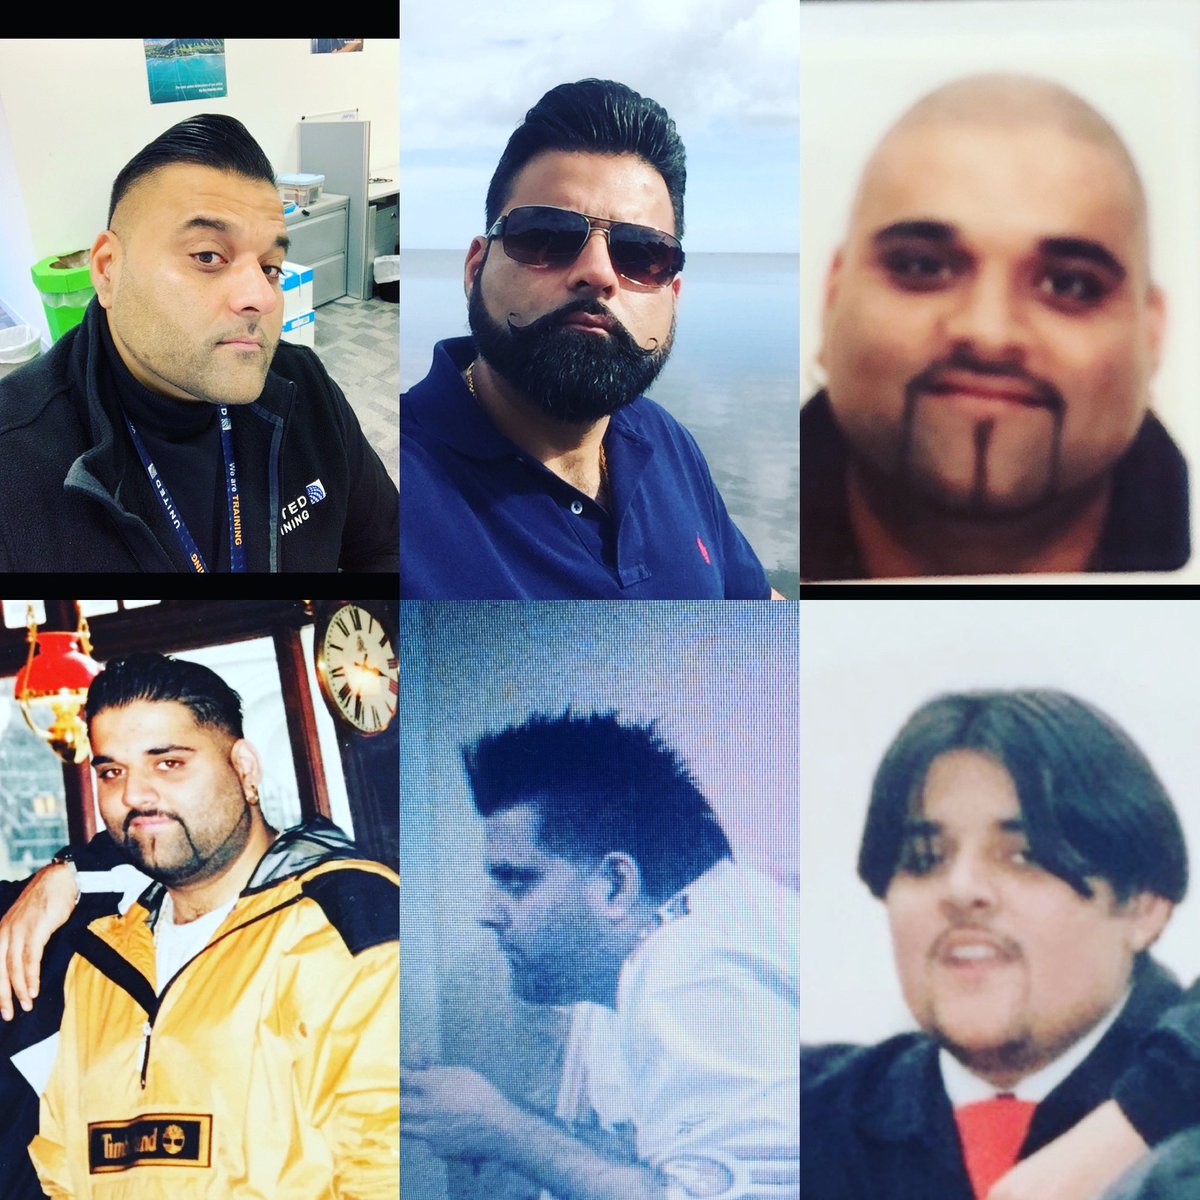 So I have had some hairstyles and beard styles in my time, thinking I should have a change for the isolation period...should I go back or do something completely different??? 🤔🤔🤔 #choices #isolationideas #yesthereisoneeggheadpicture #InThisTogether